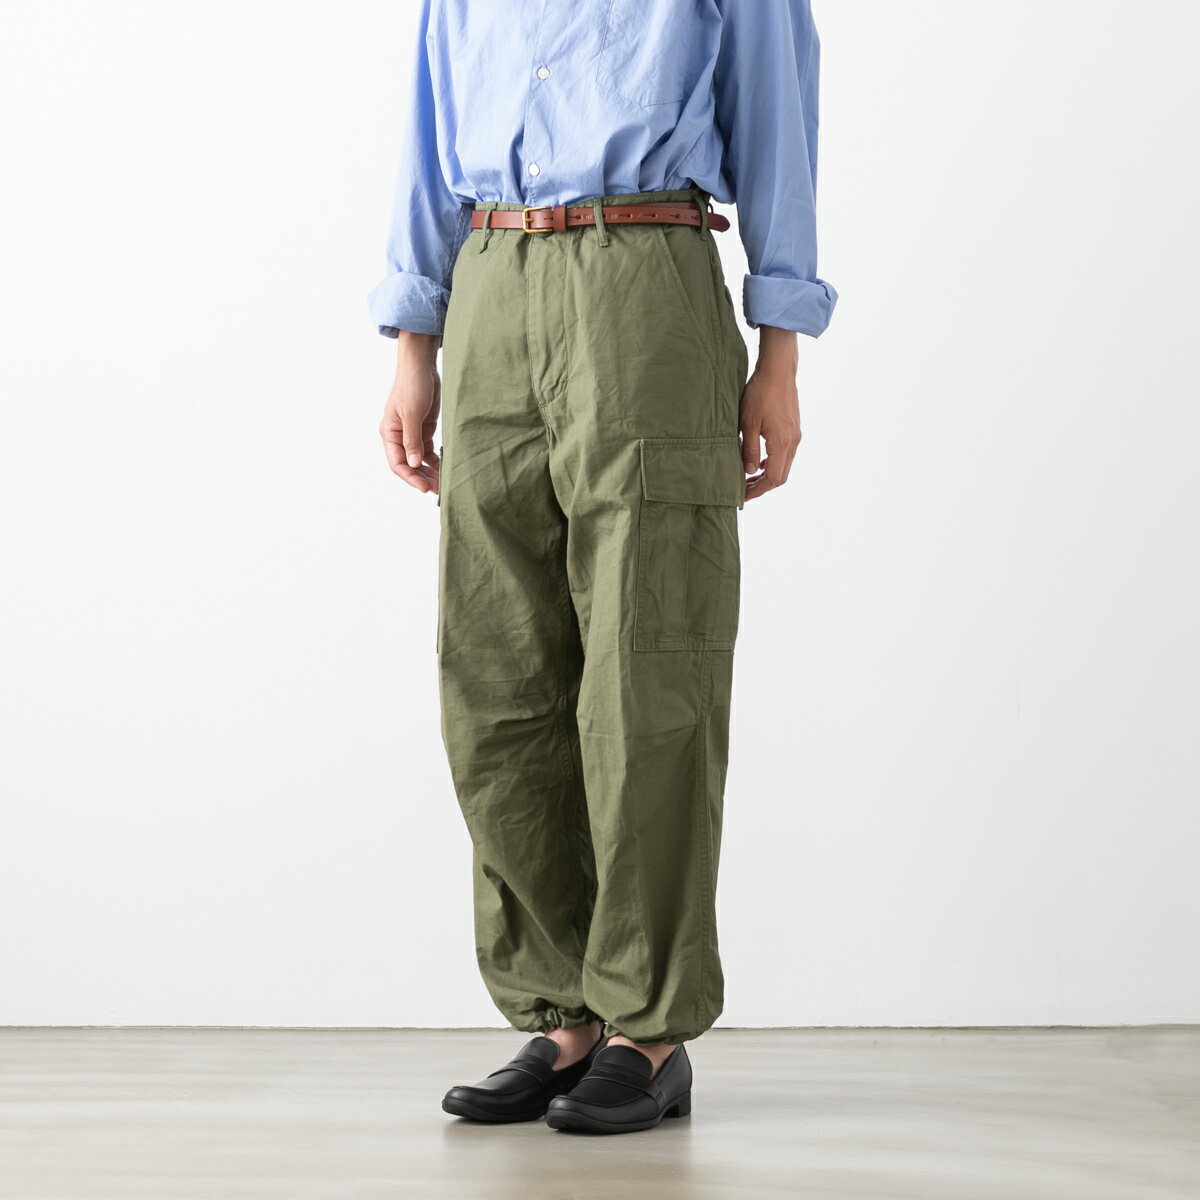 orSlow IAXE VINTAGE FIT 6P CARGO PANTS Be[WtBbg J[S pc V5260RIP